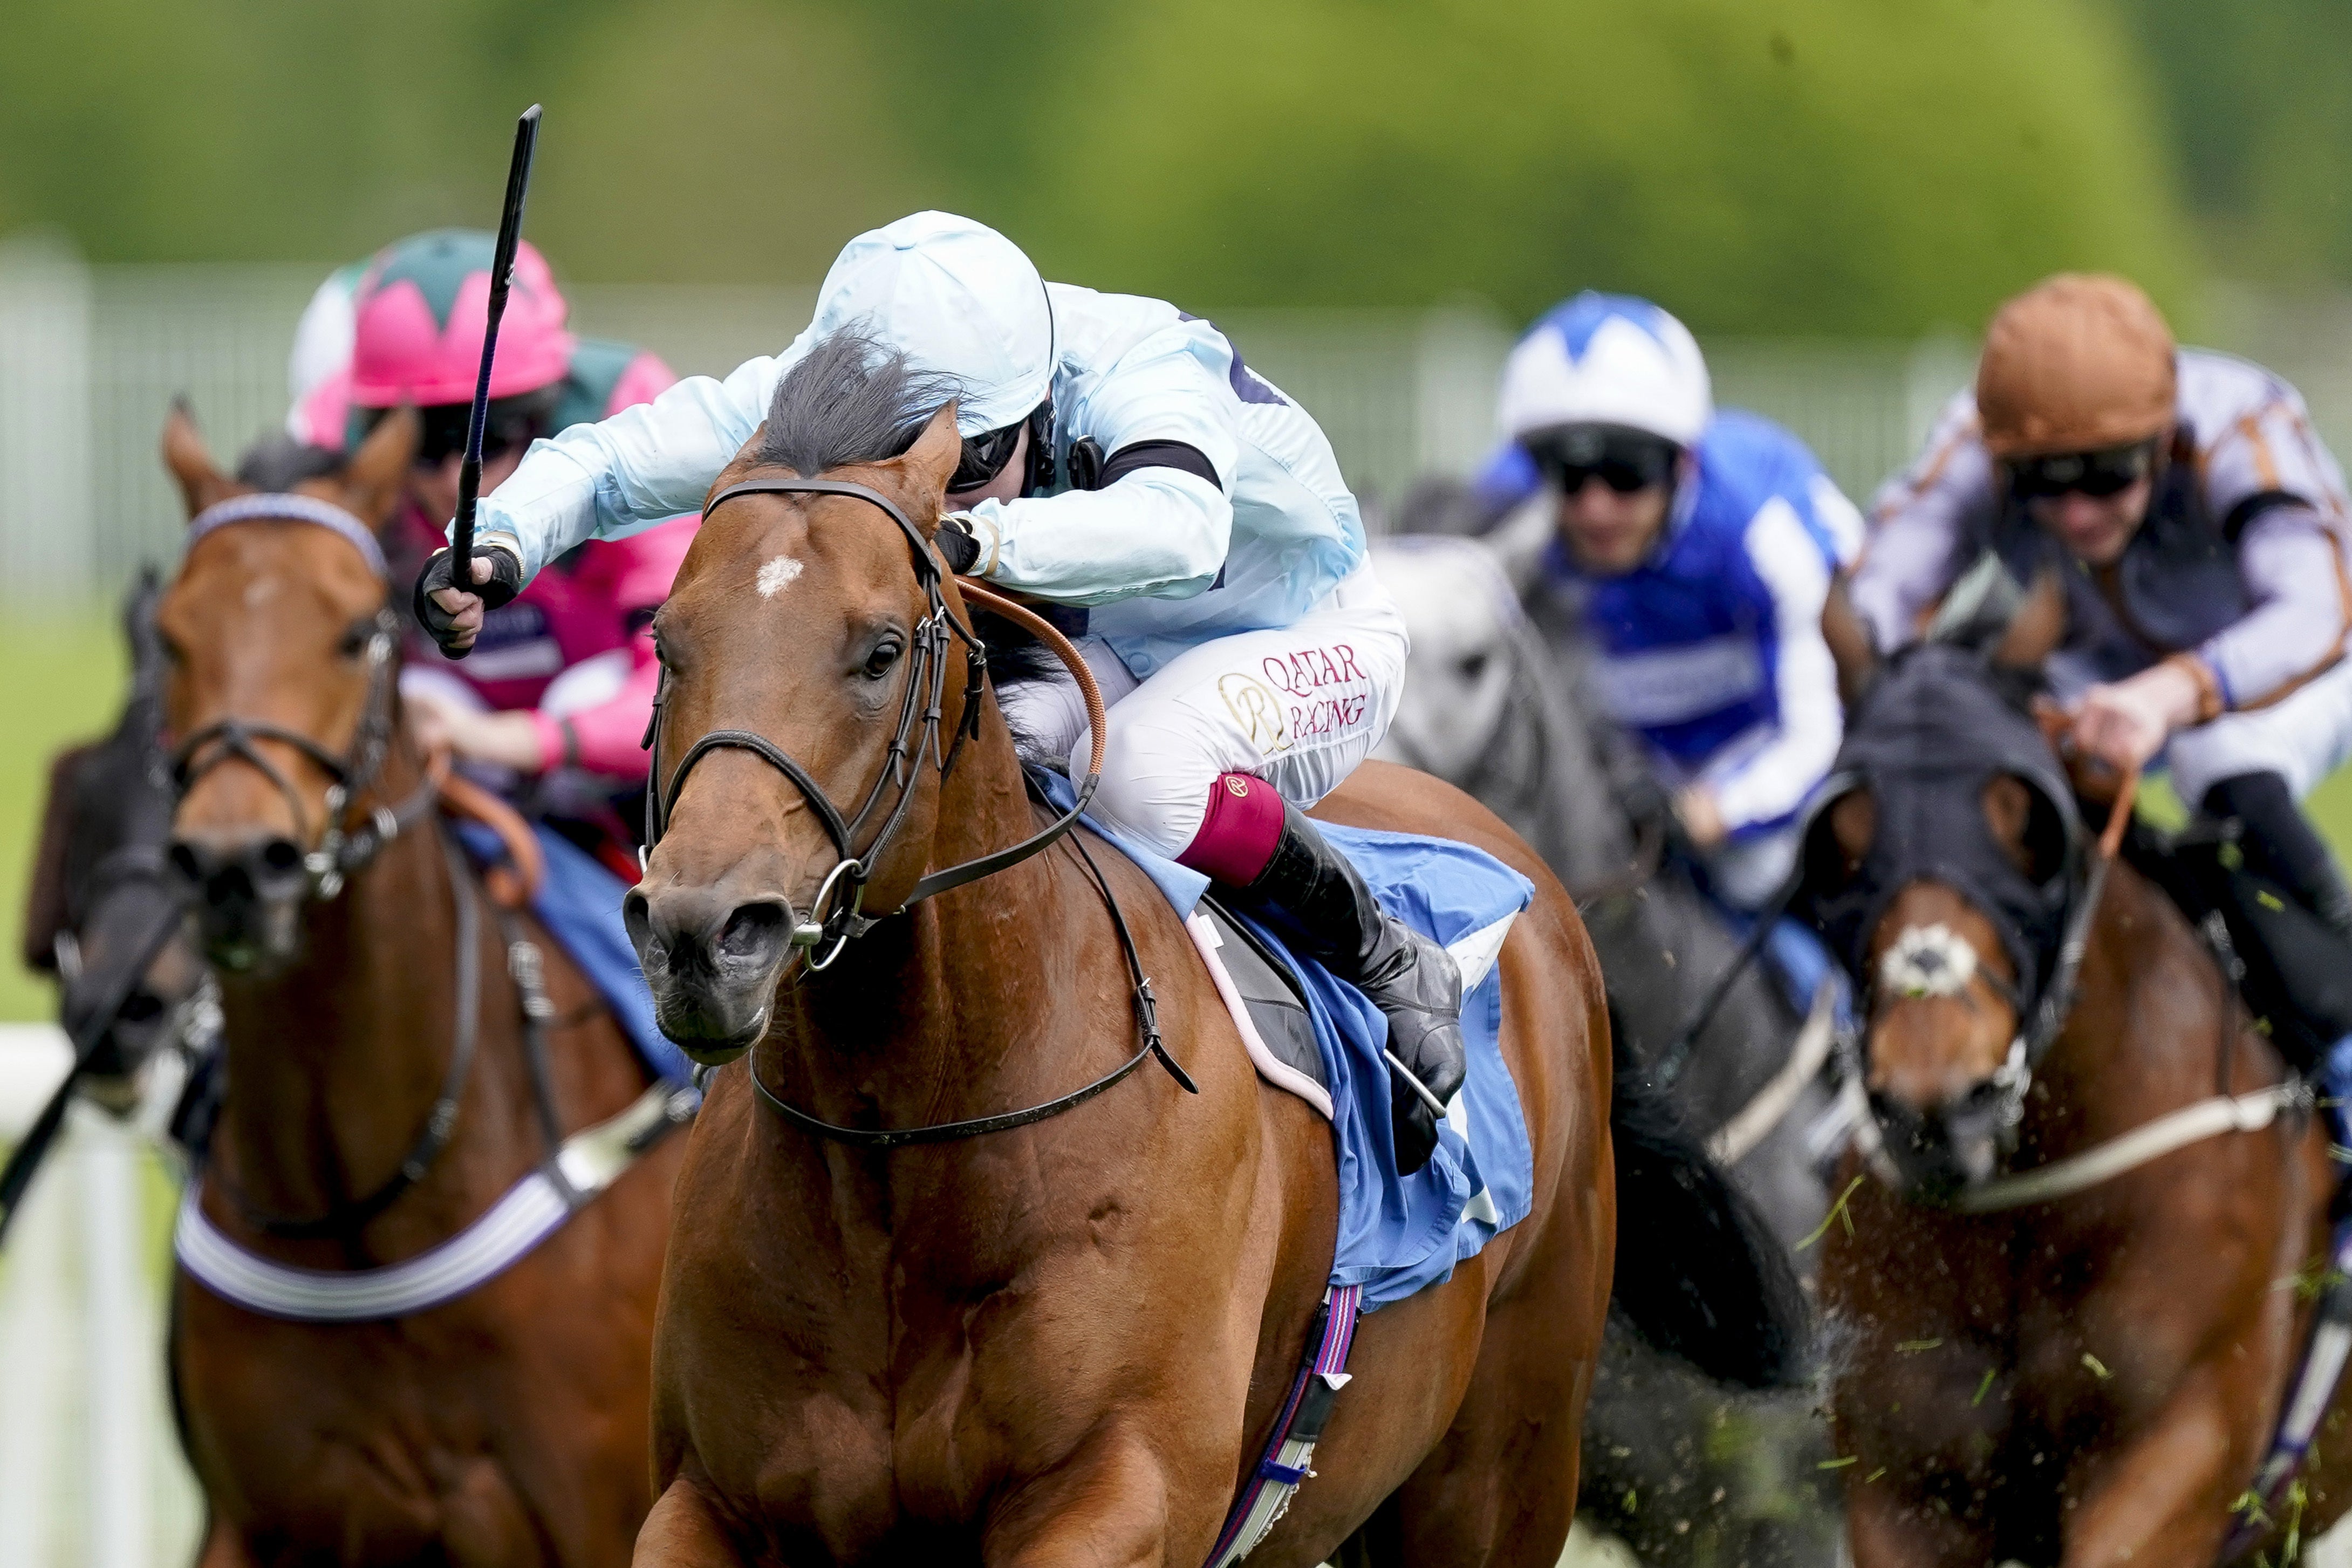 Starman began his season with a win in the Duke of York Stakes